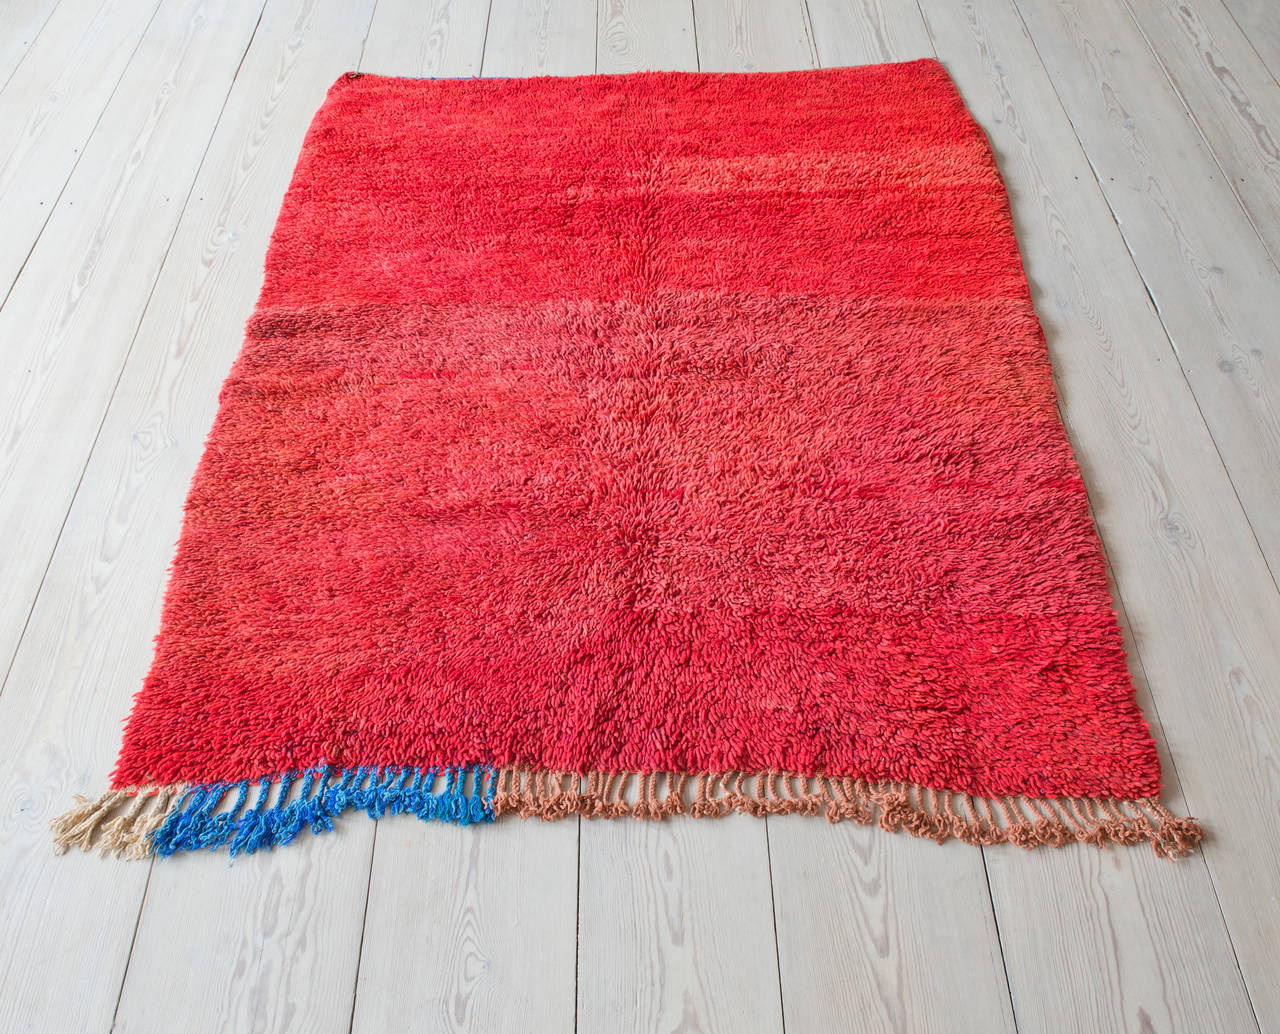 Amazing Middle Atlas wool rug. Shades of red and blue and brown tassels.